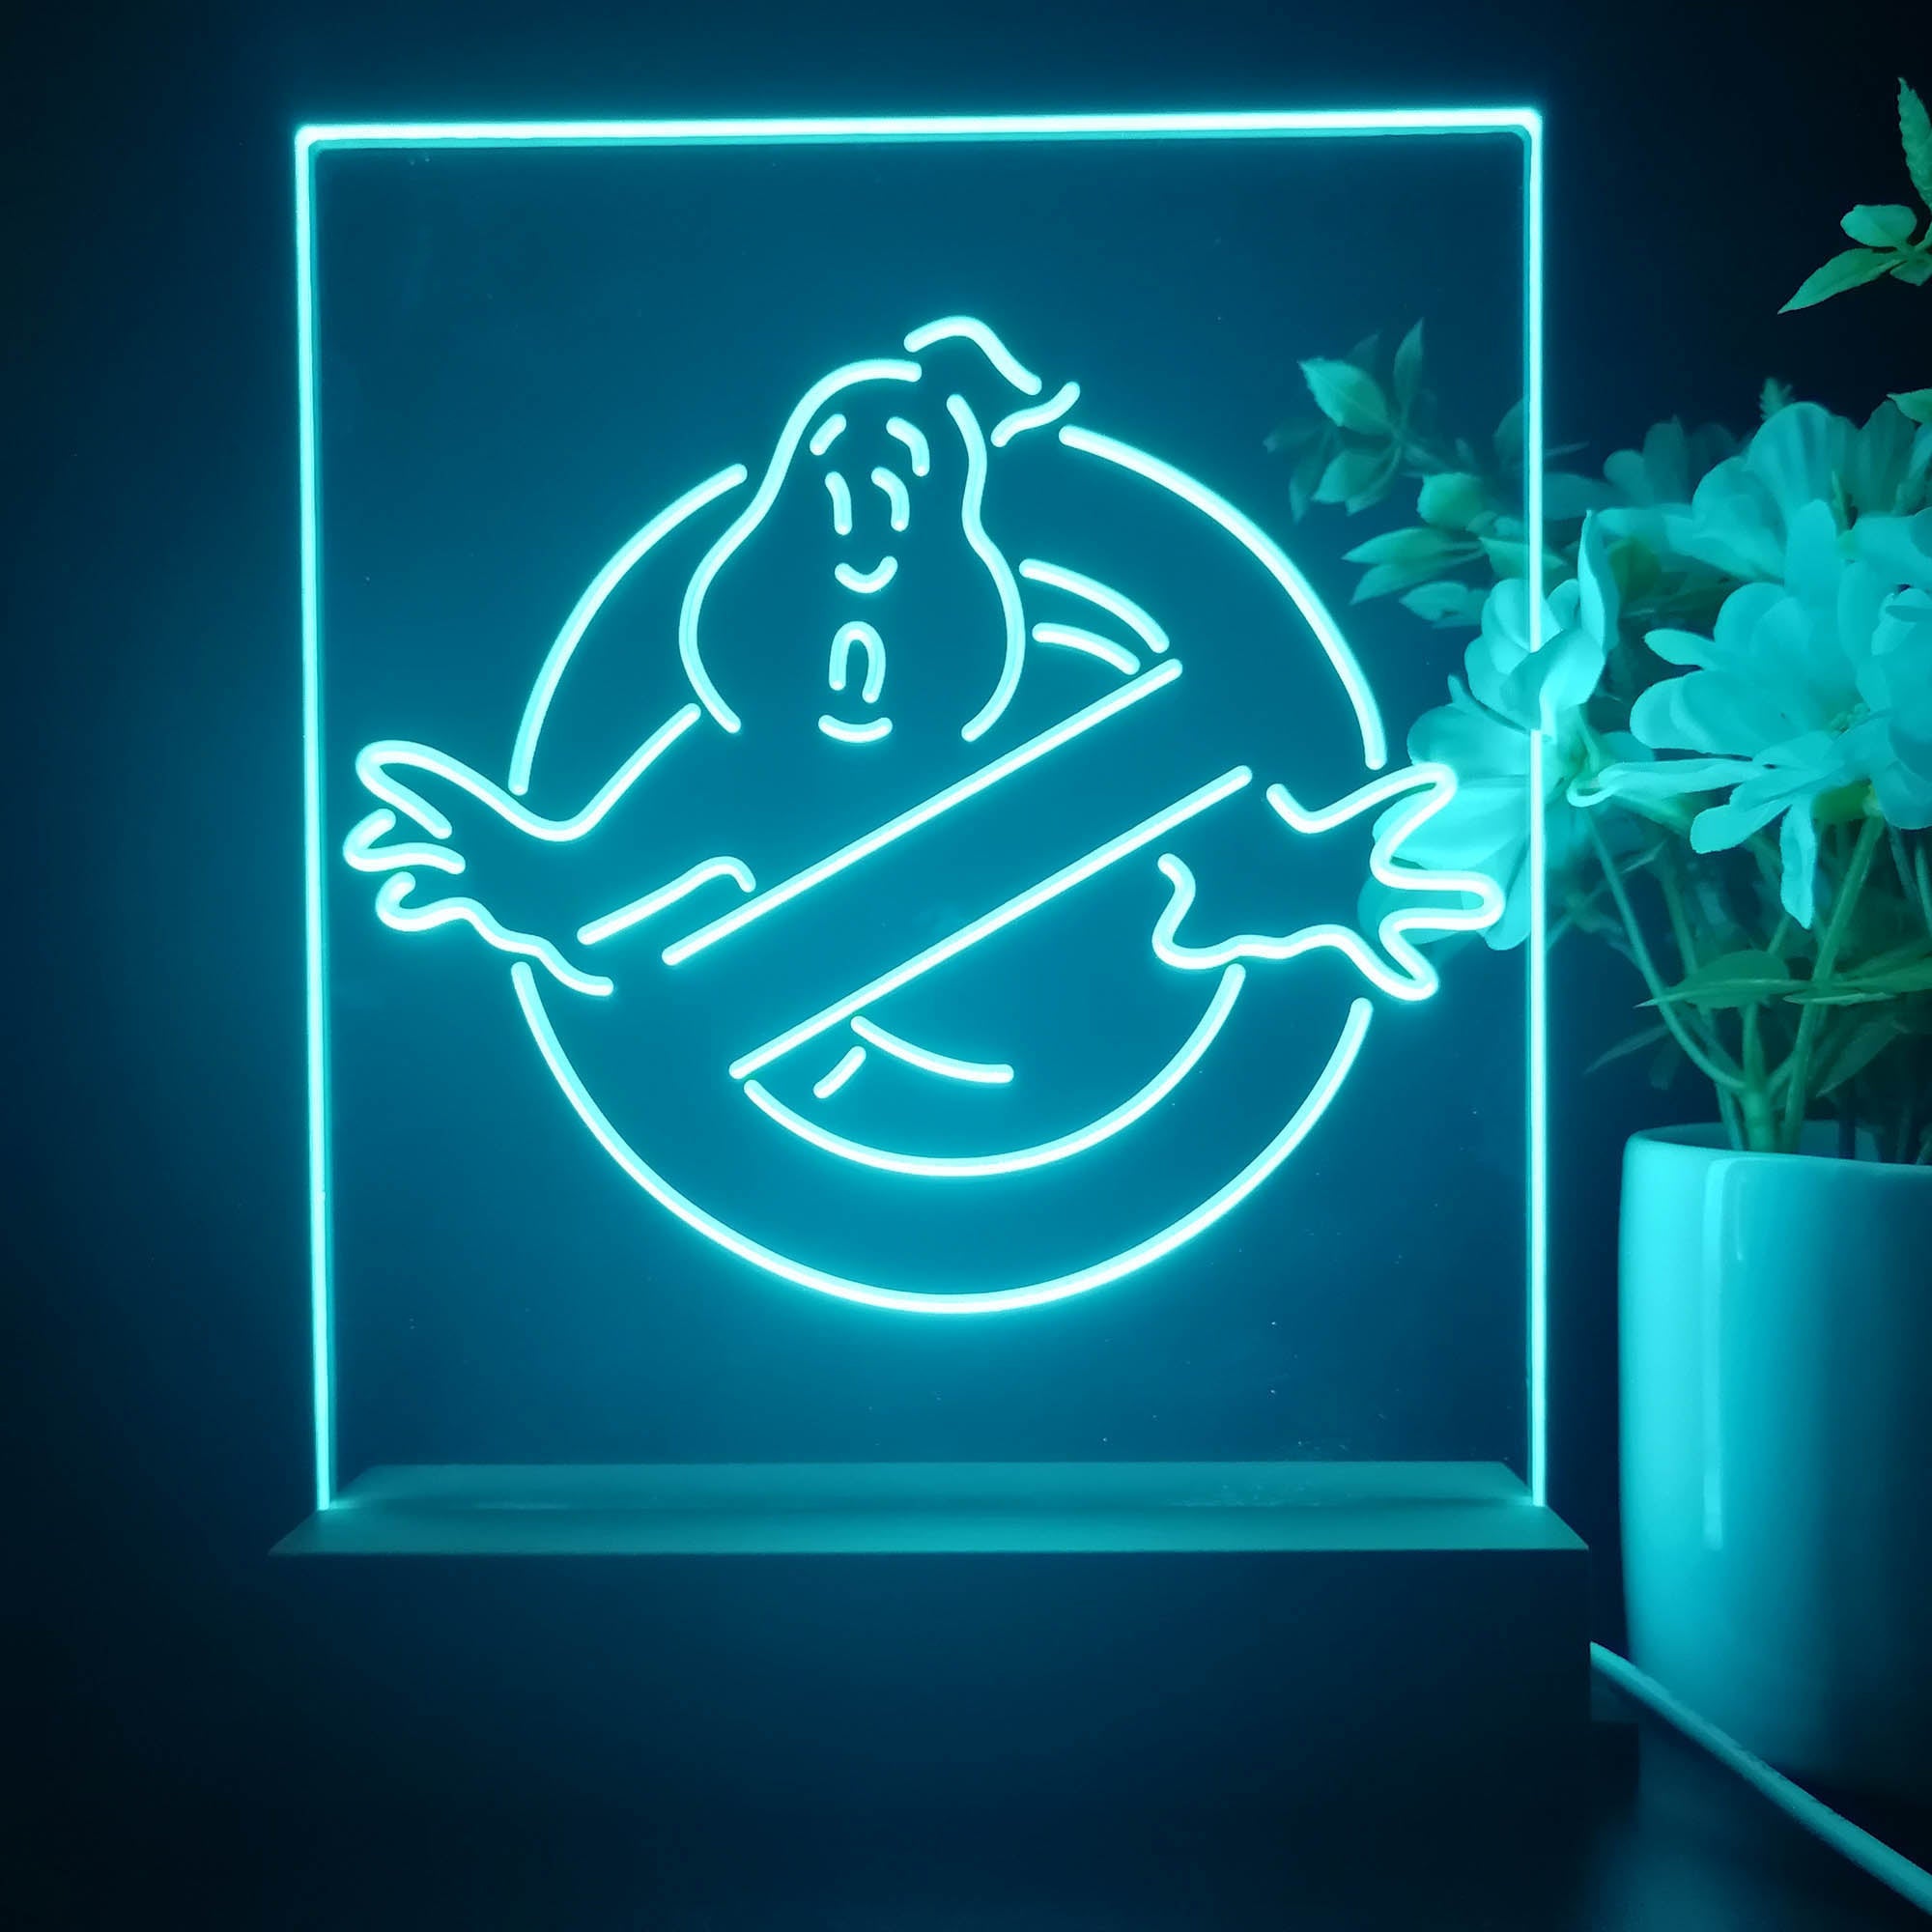 Ghostbusters No Ghosts 3D Illusion Night Light Desk Lamp